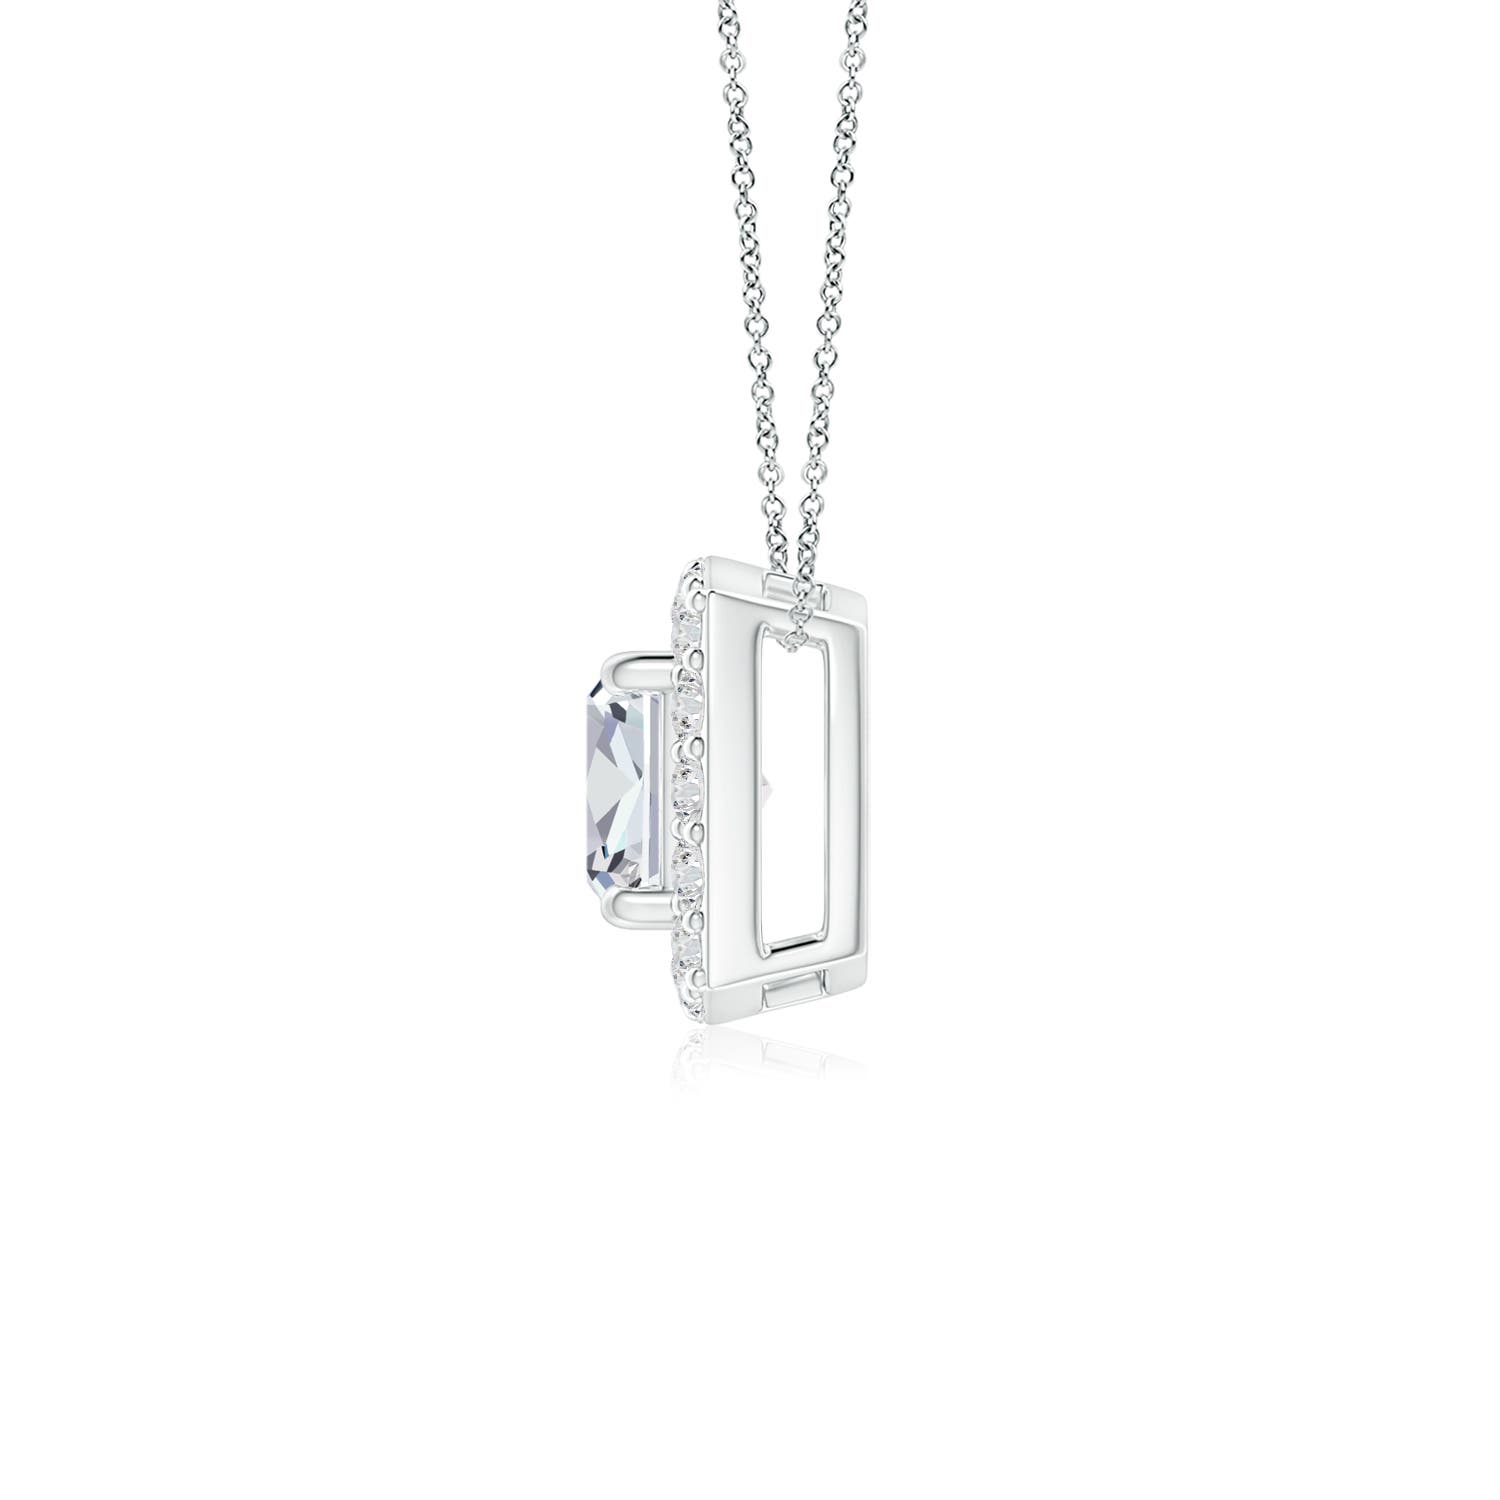 H, SI2 / 0.36 CT / 14 KT White Gold